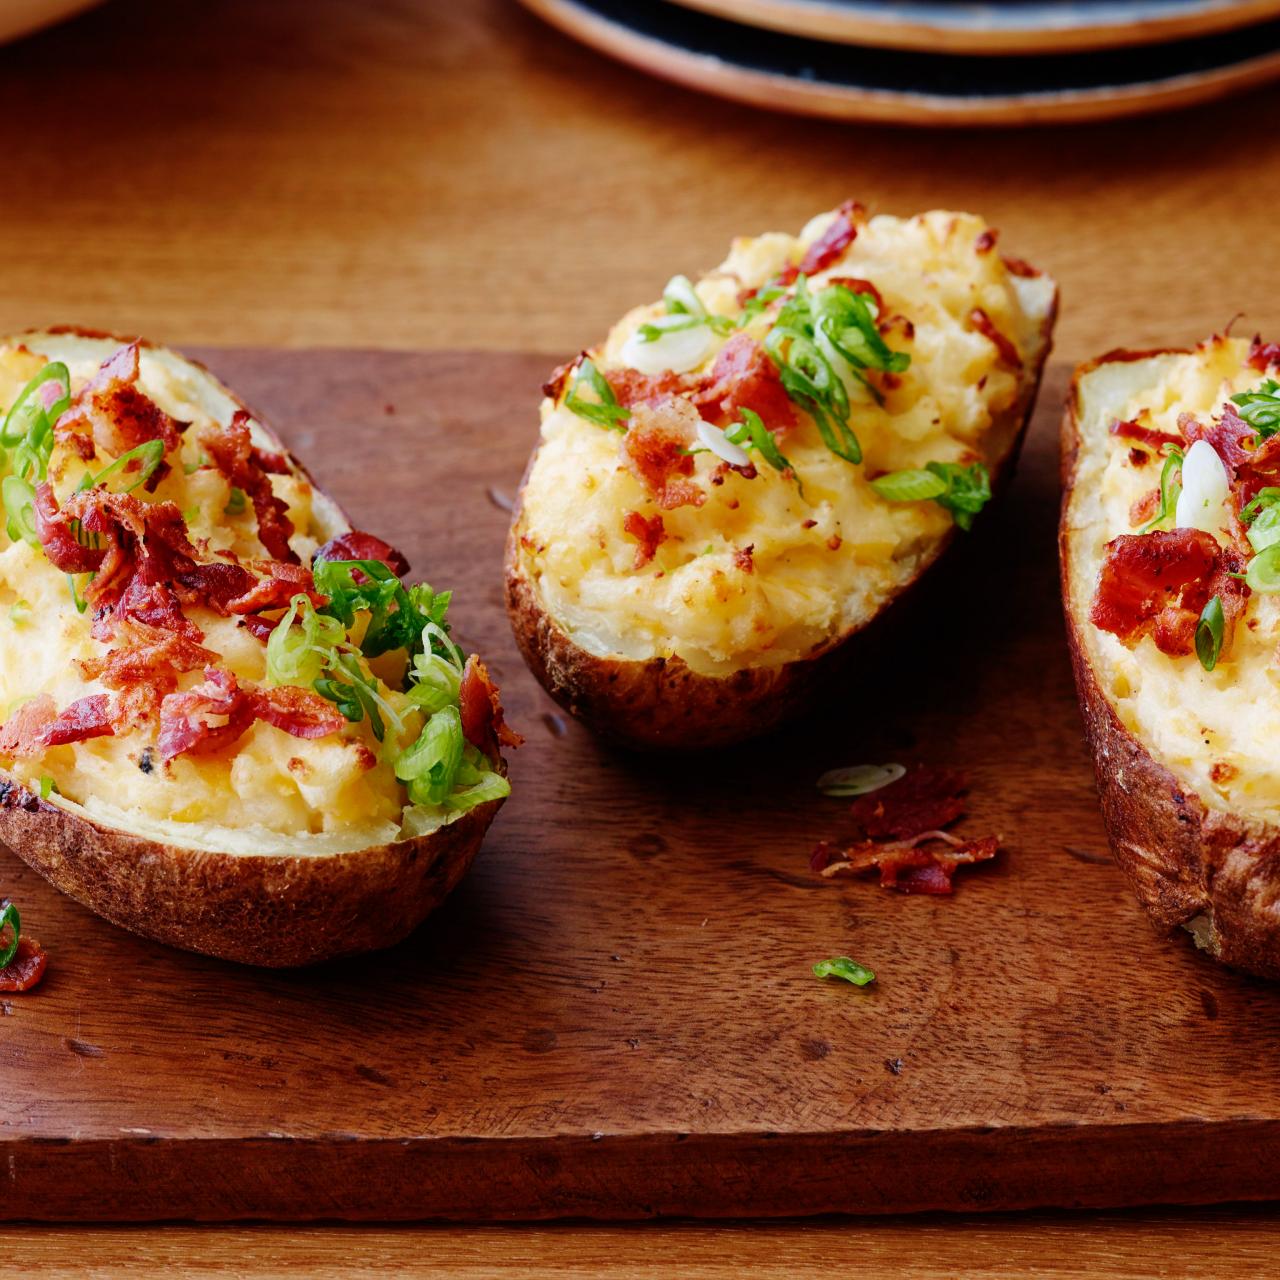 Twiced Baked Potatoes For Sale